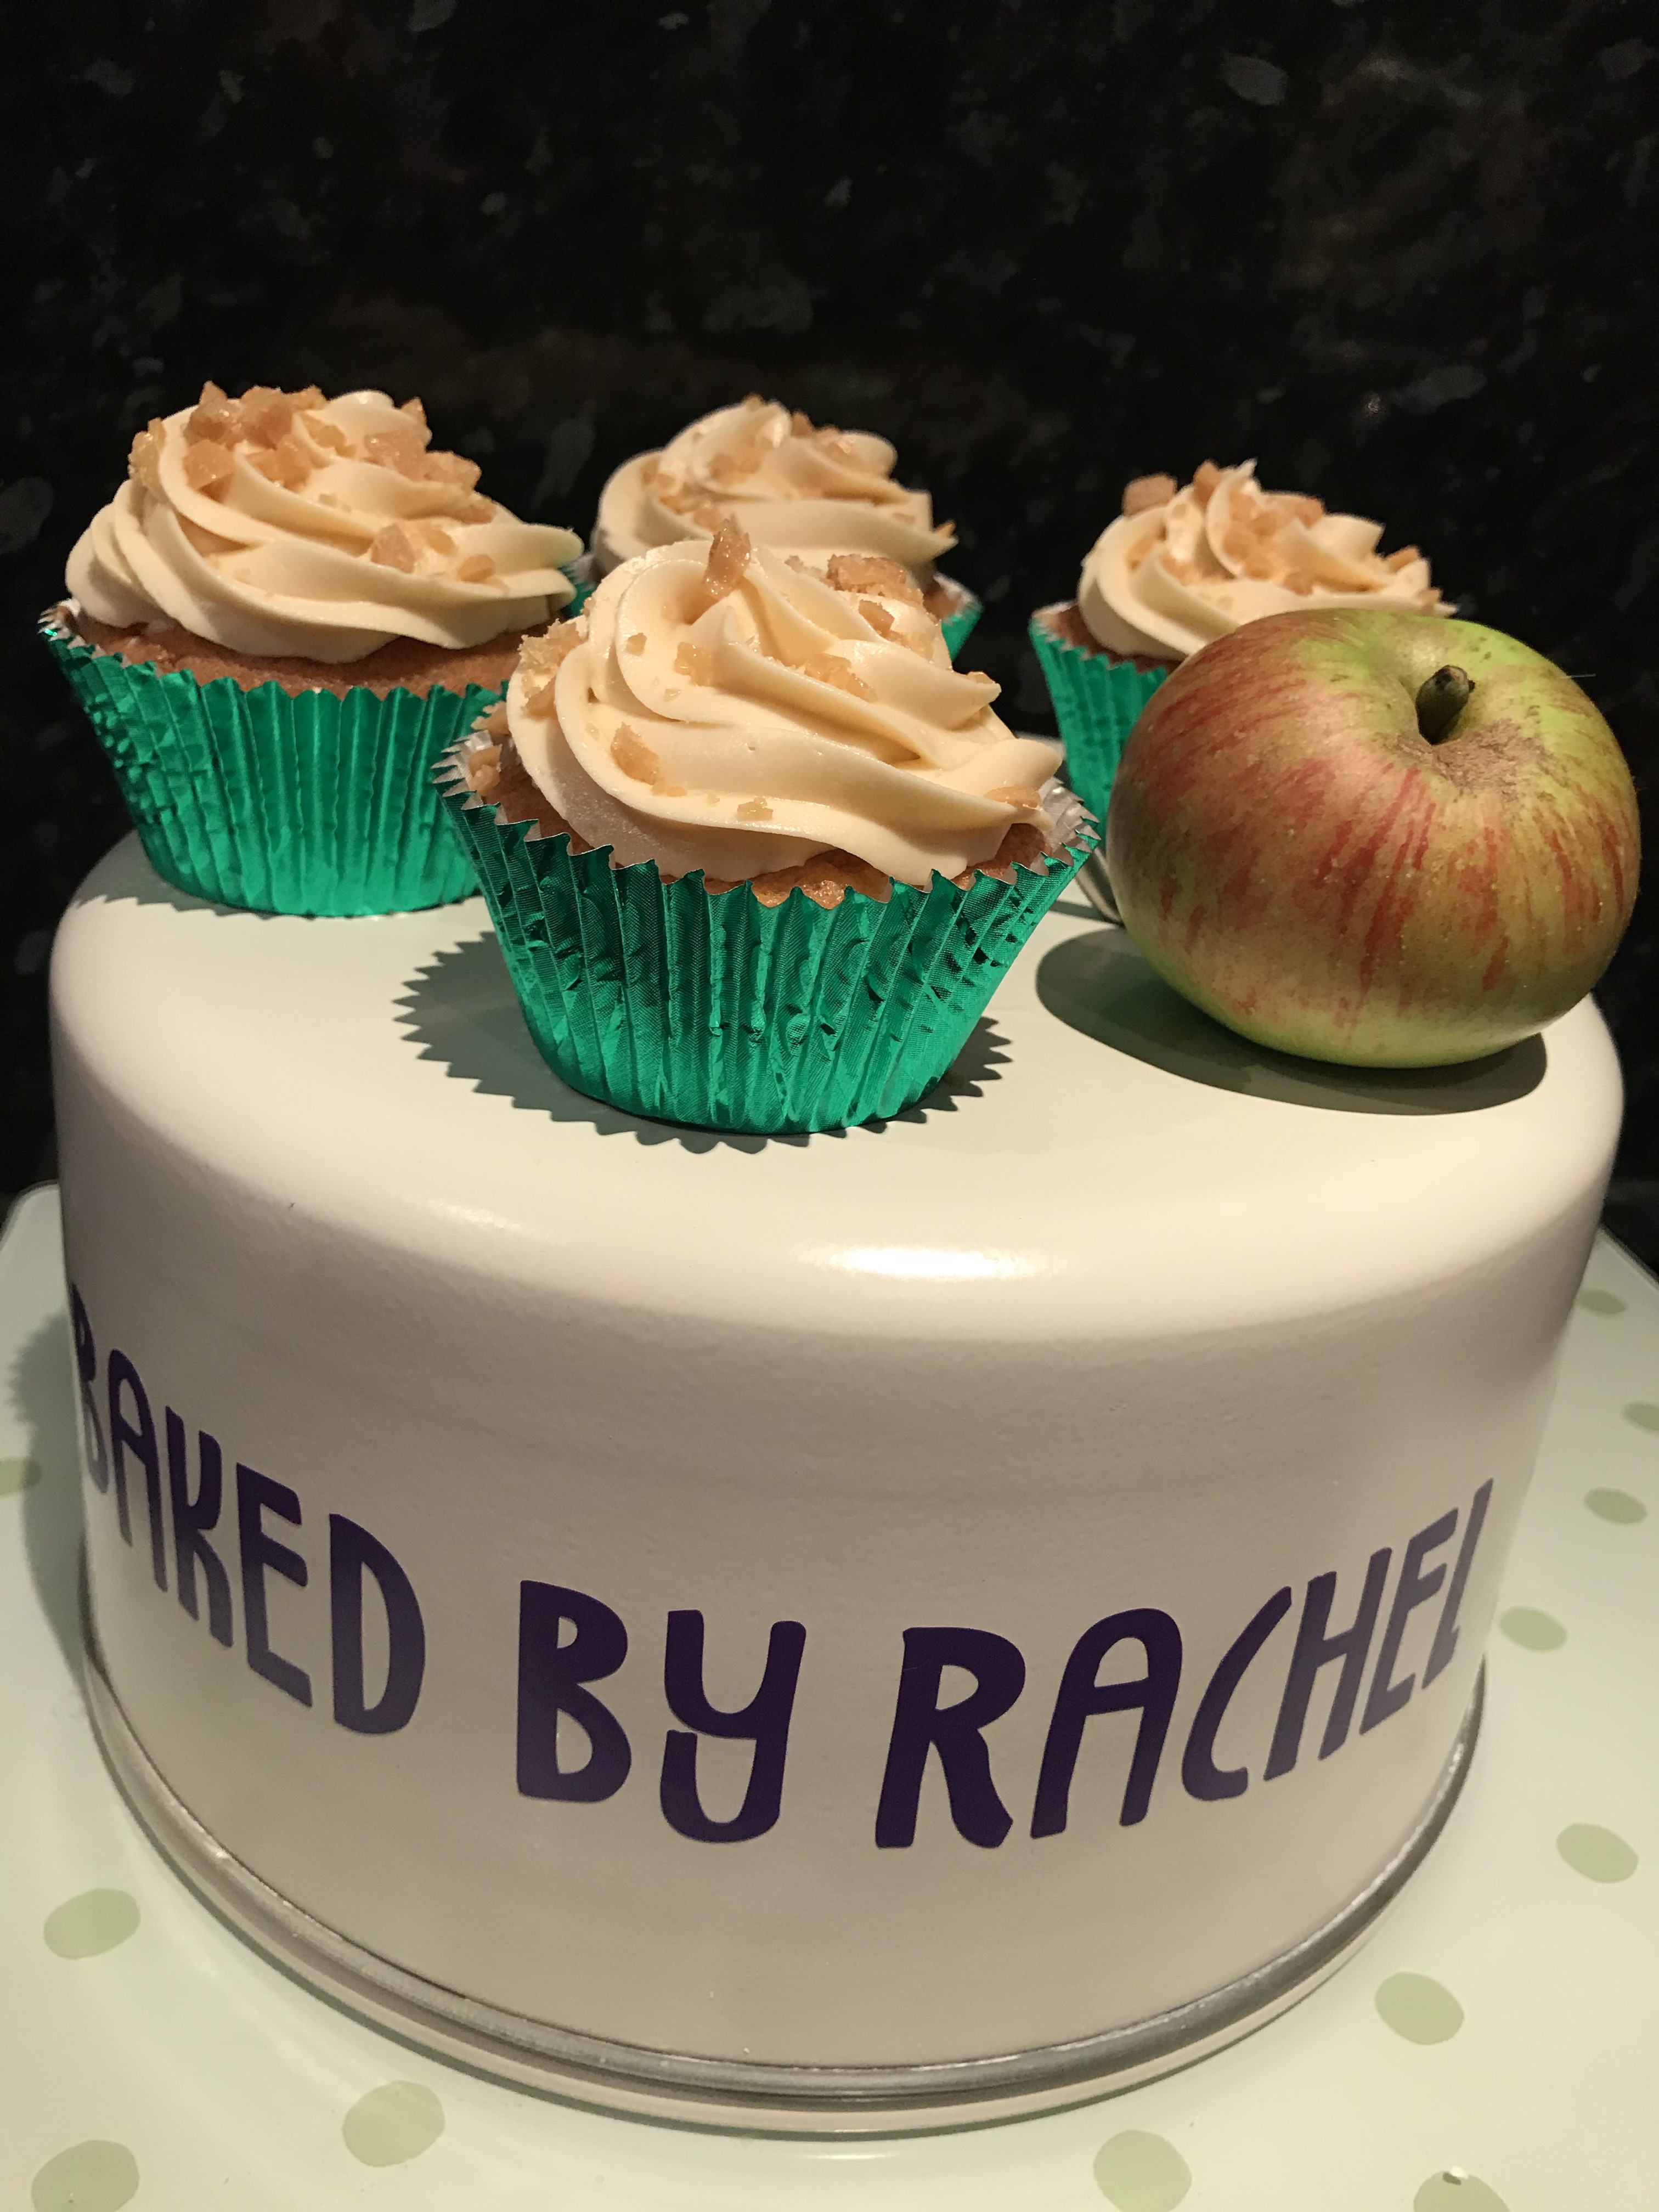 Toffee Apple Cupcakes